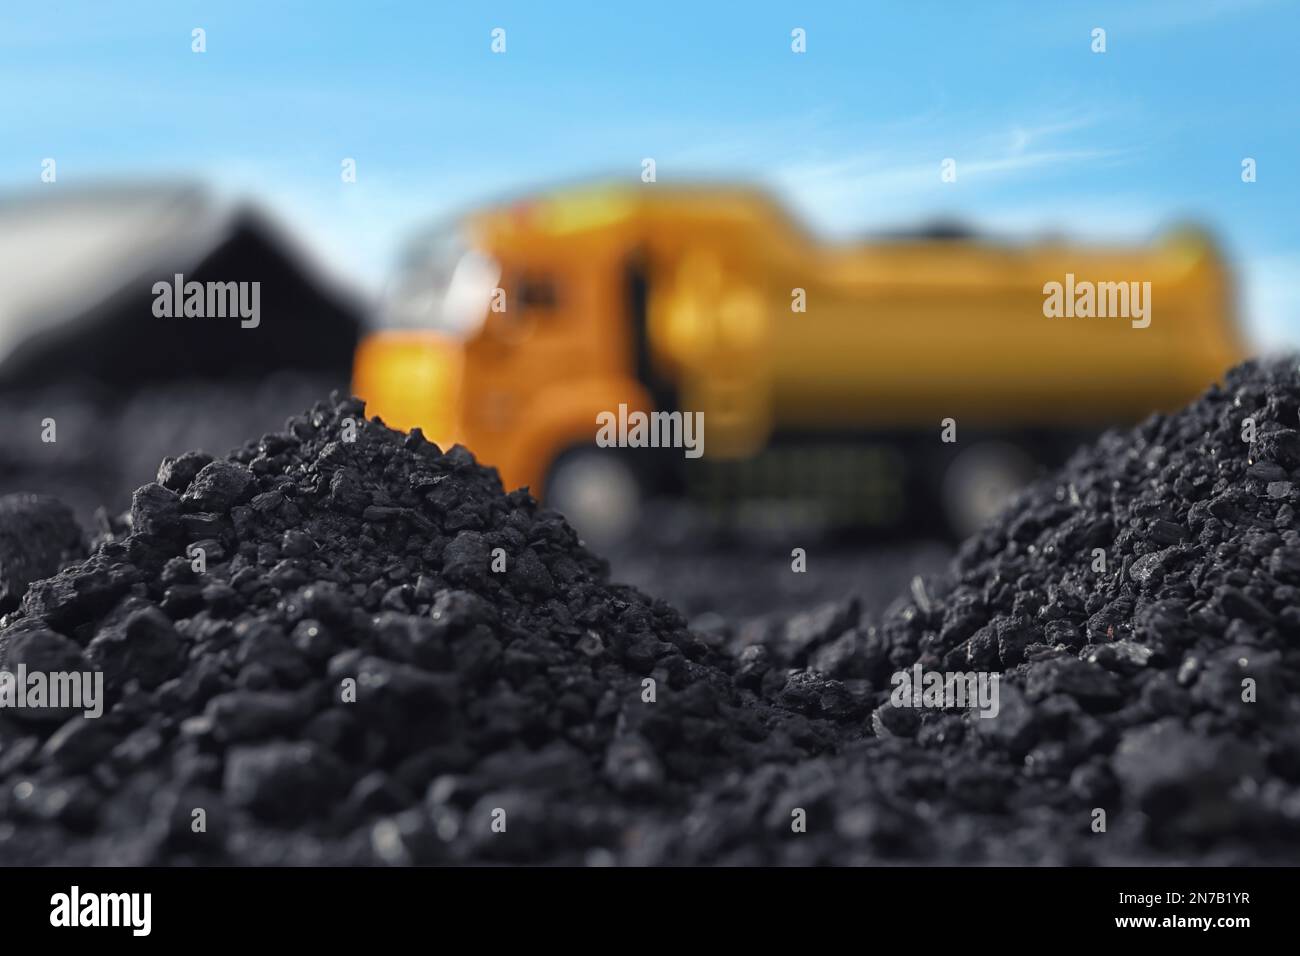 Piles of coal and blurred yellow truck on background, closeup Stock Photo